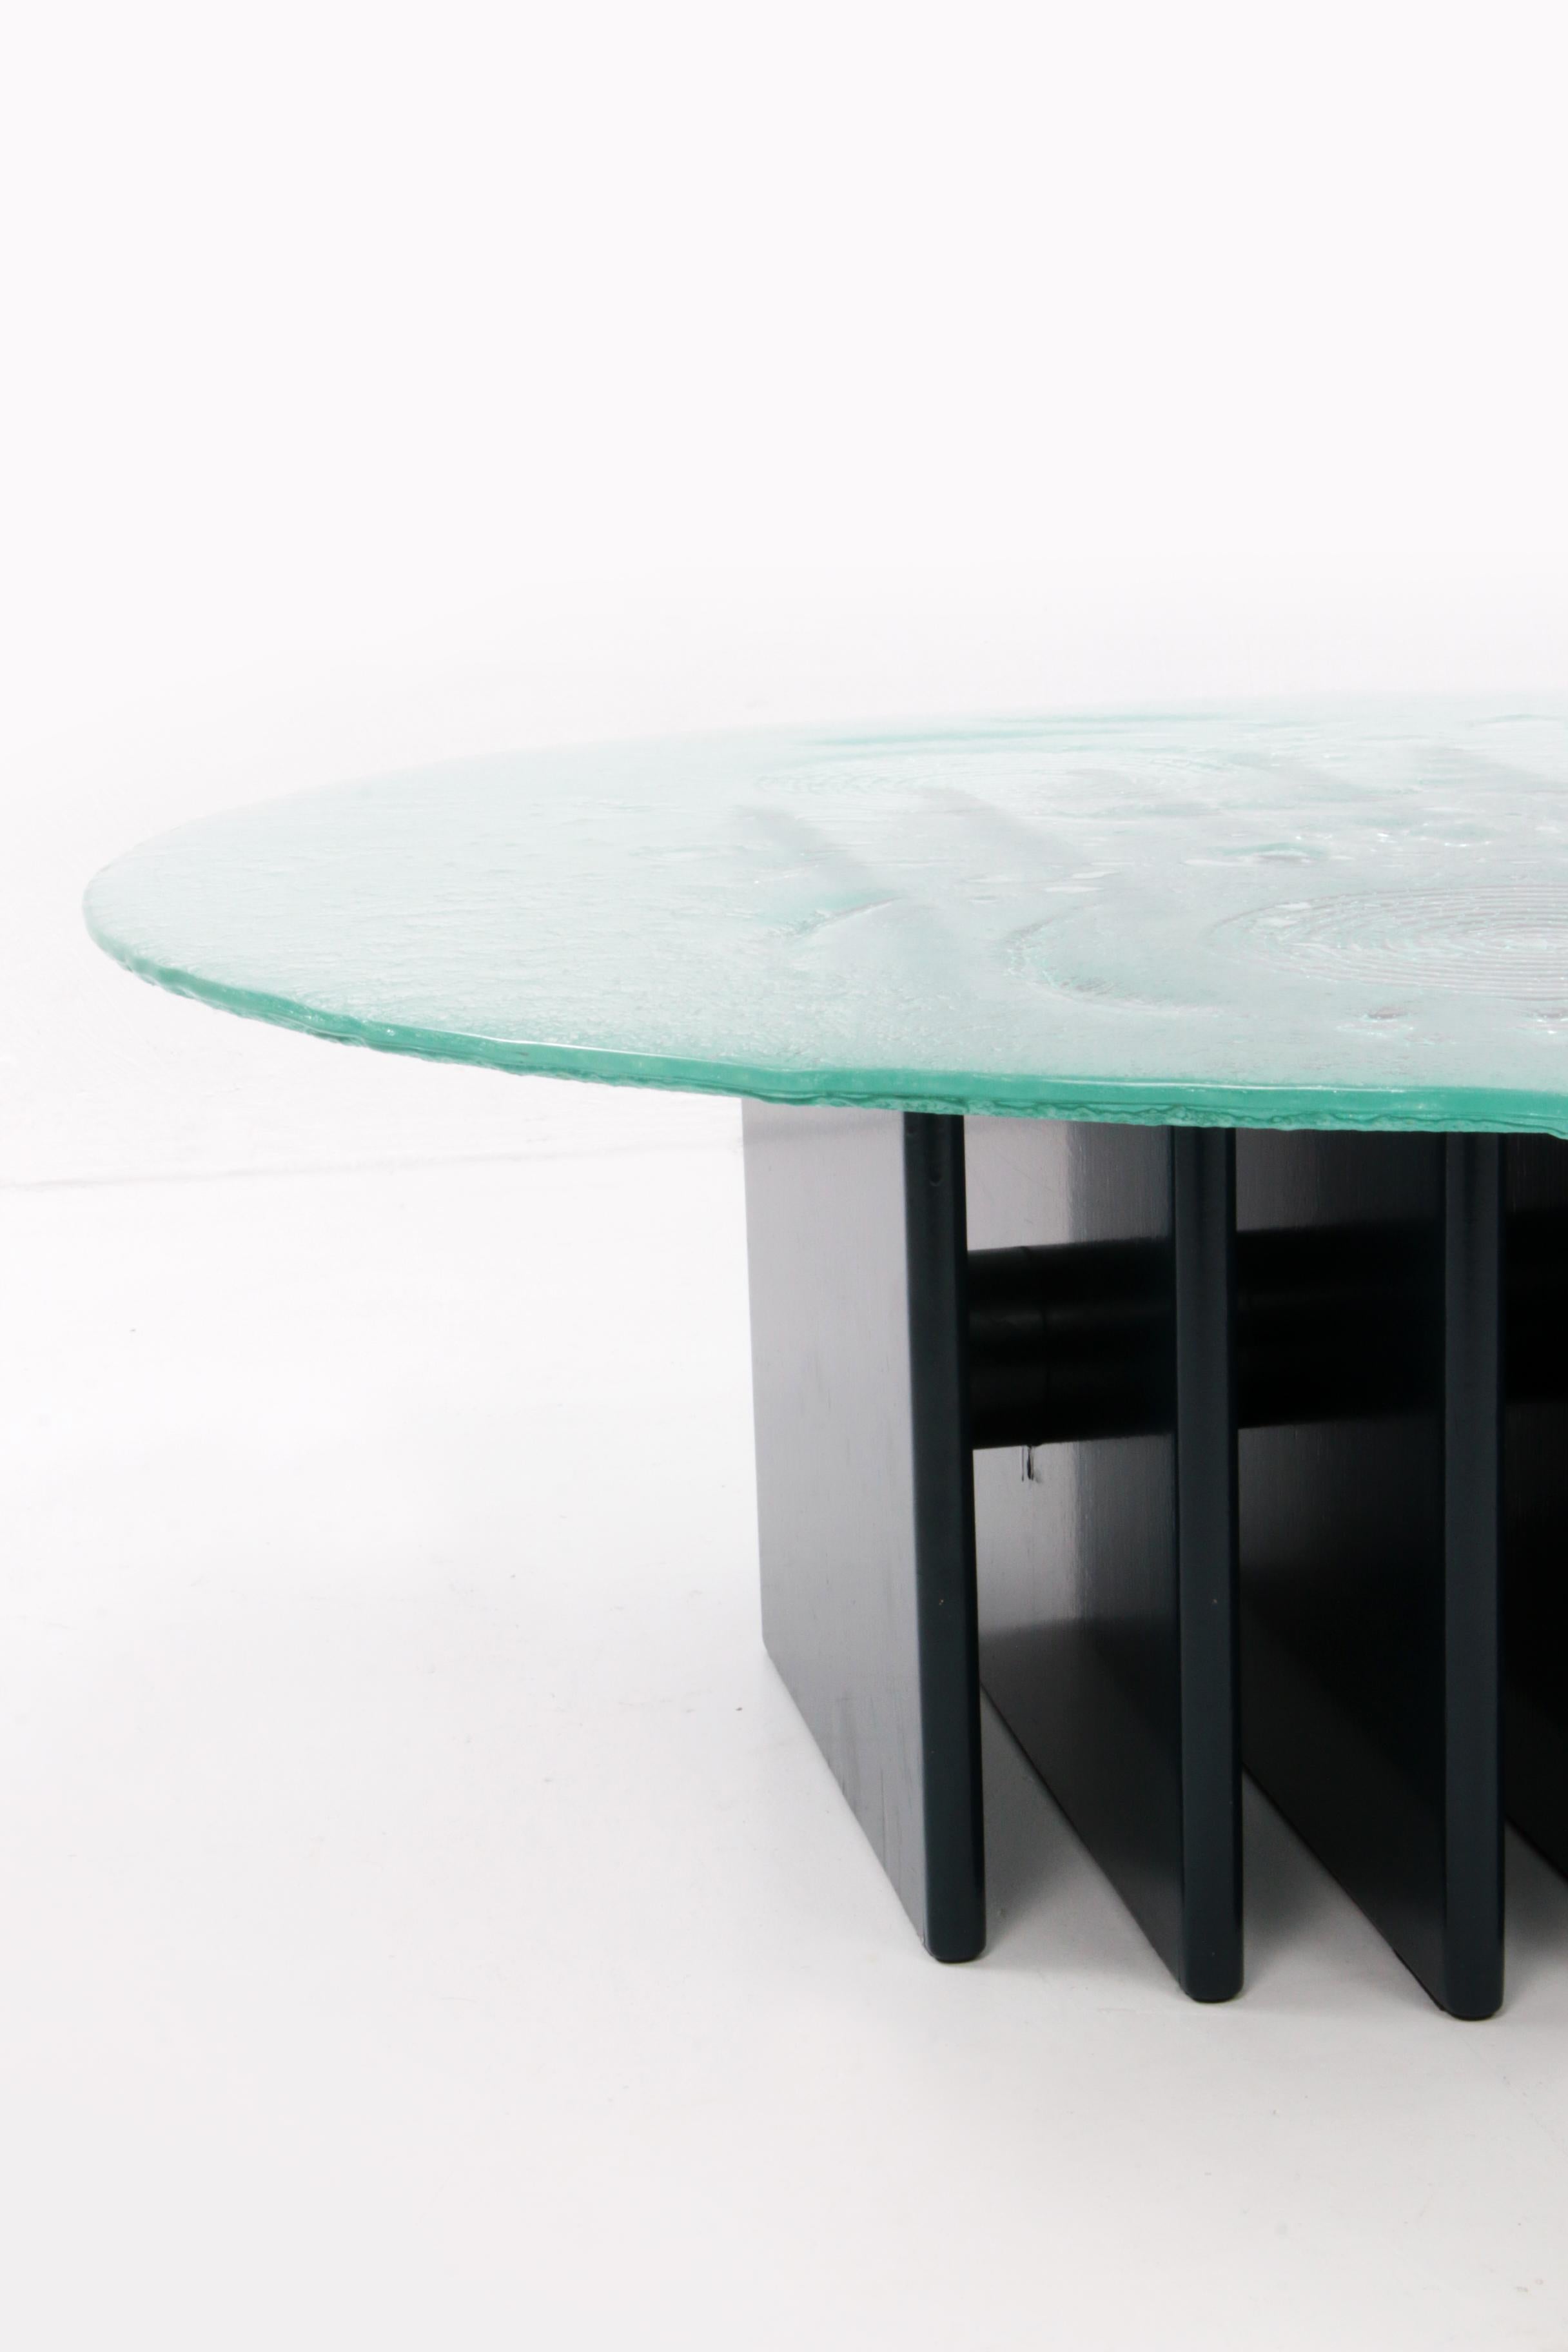 Art Glass Sculptural glass coffee table by Heinz Lilienthal 1970, Germany